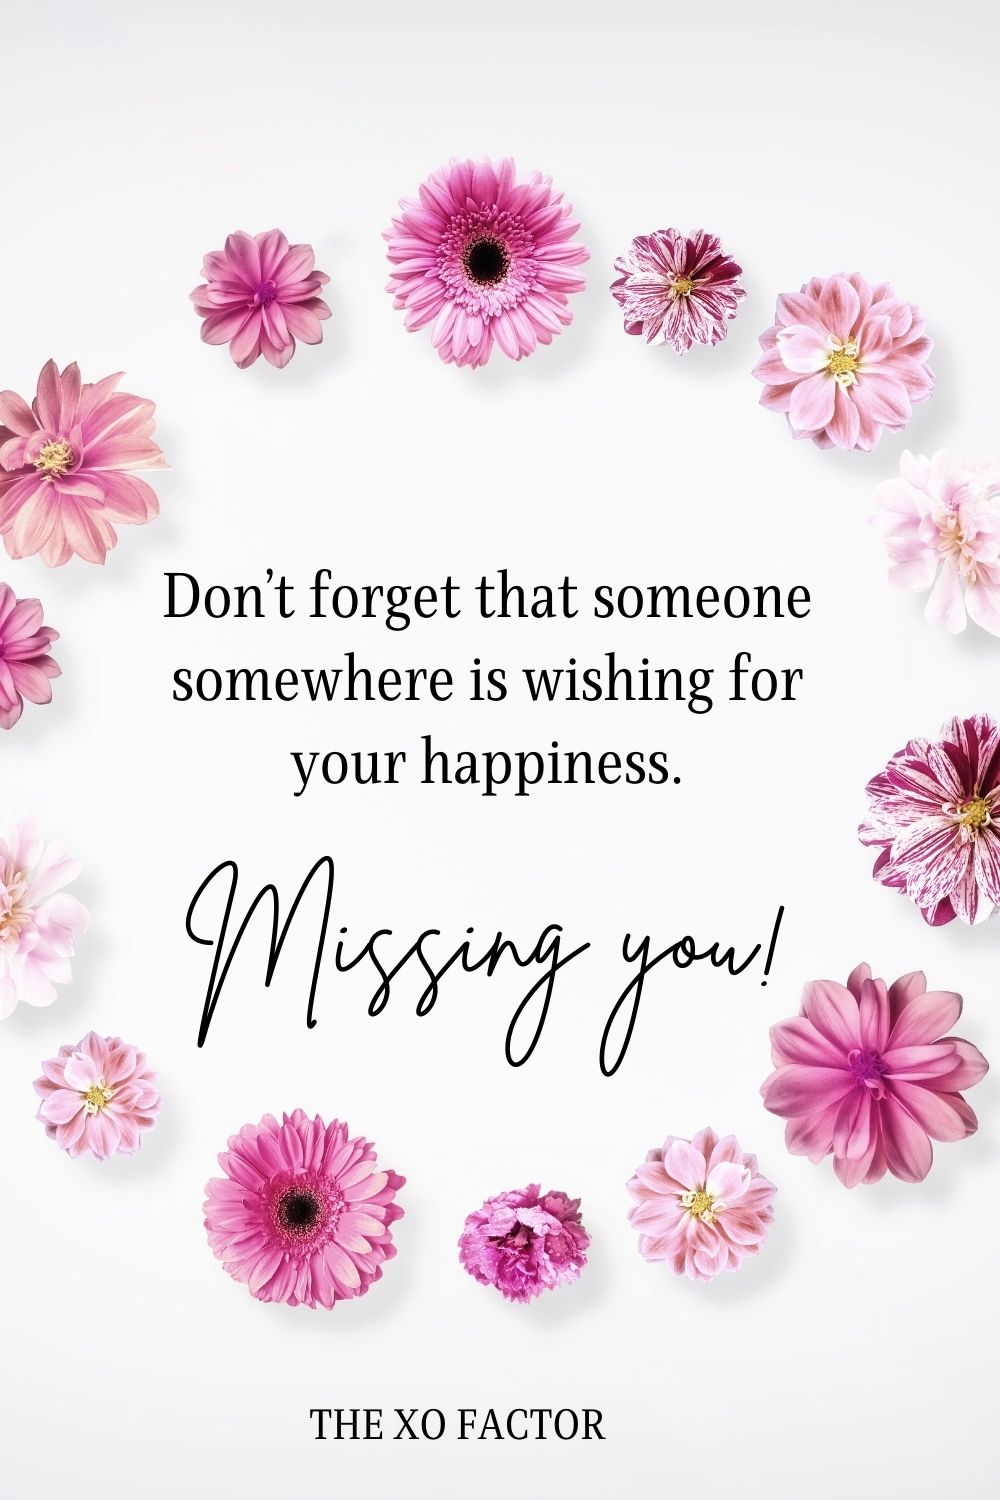 Don’t forget that someone somewhere is wishing for your happiness. Missing you!